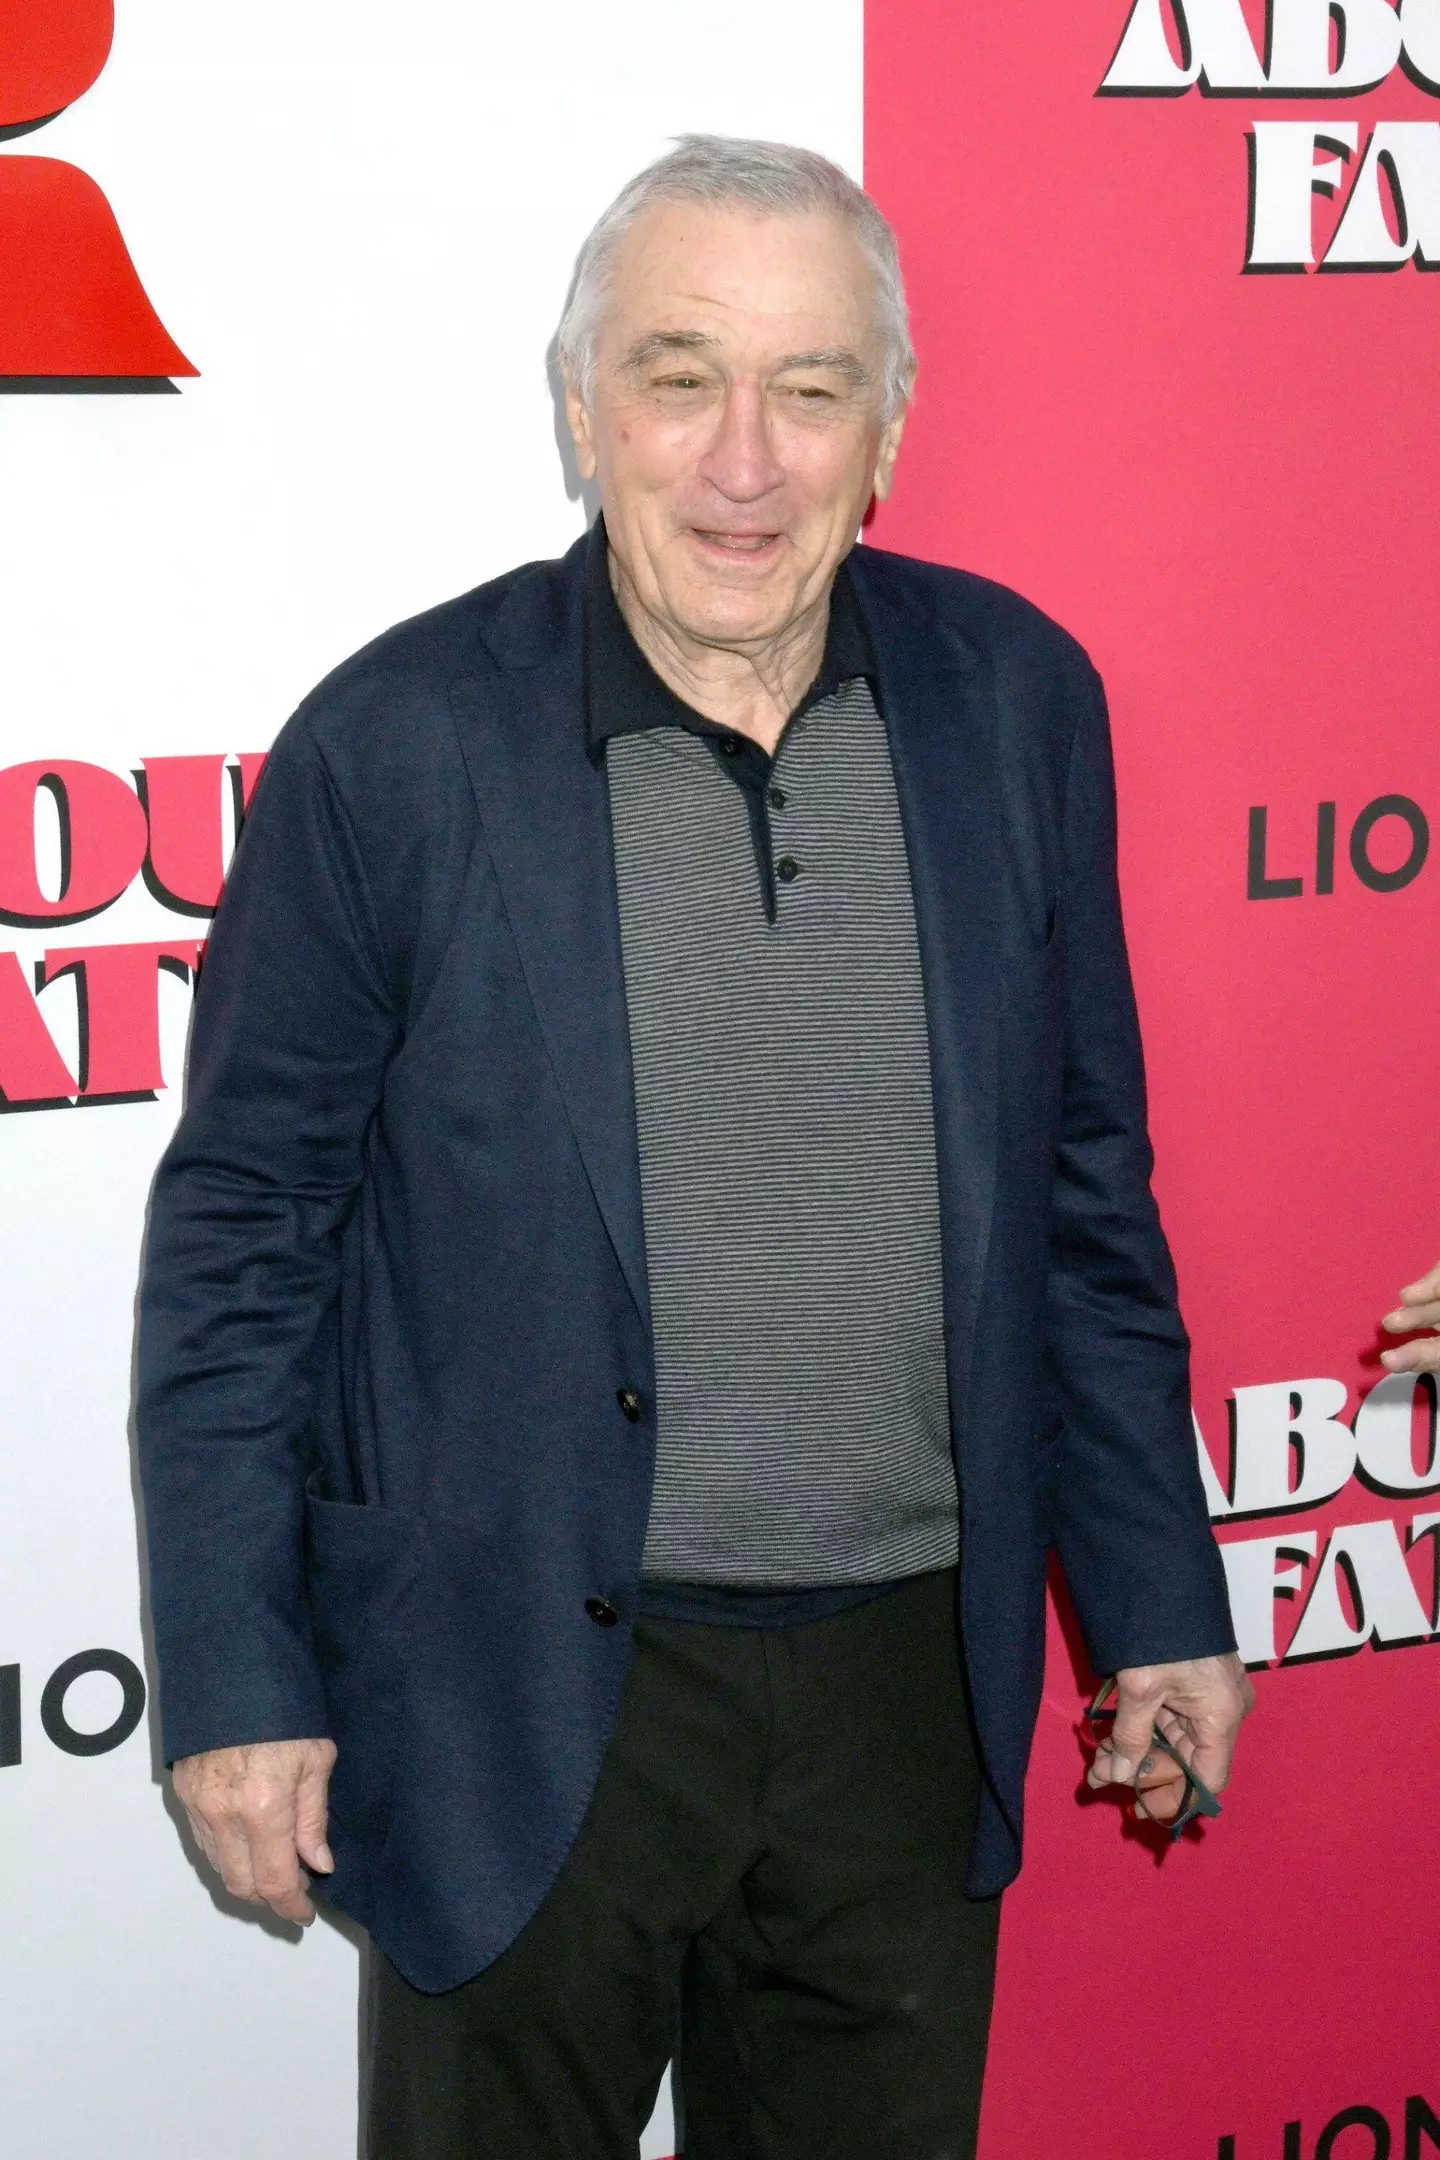 Robert De Niro at the premiere of About My Father.